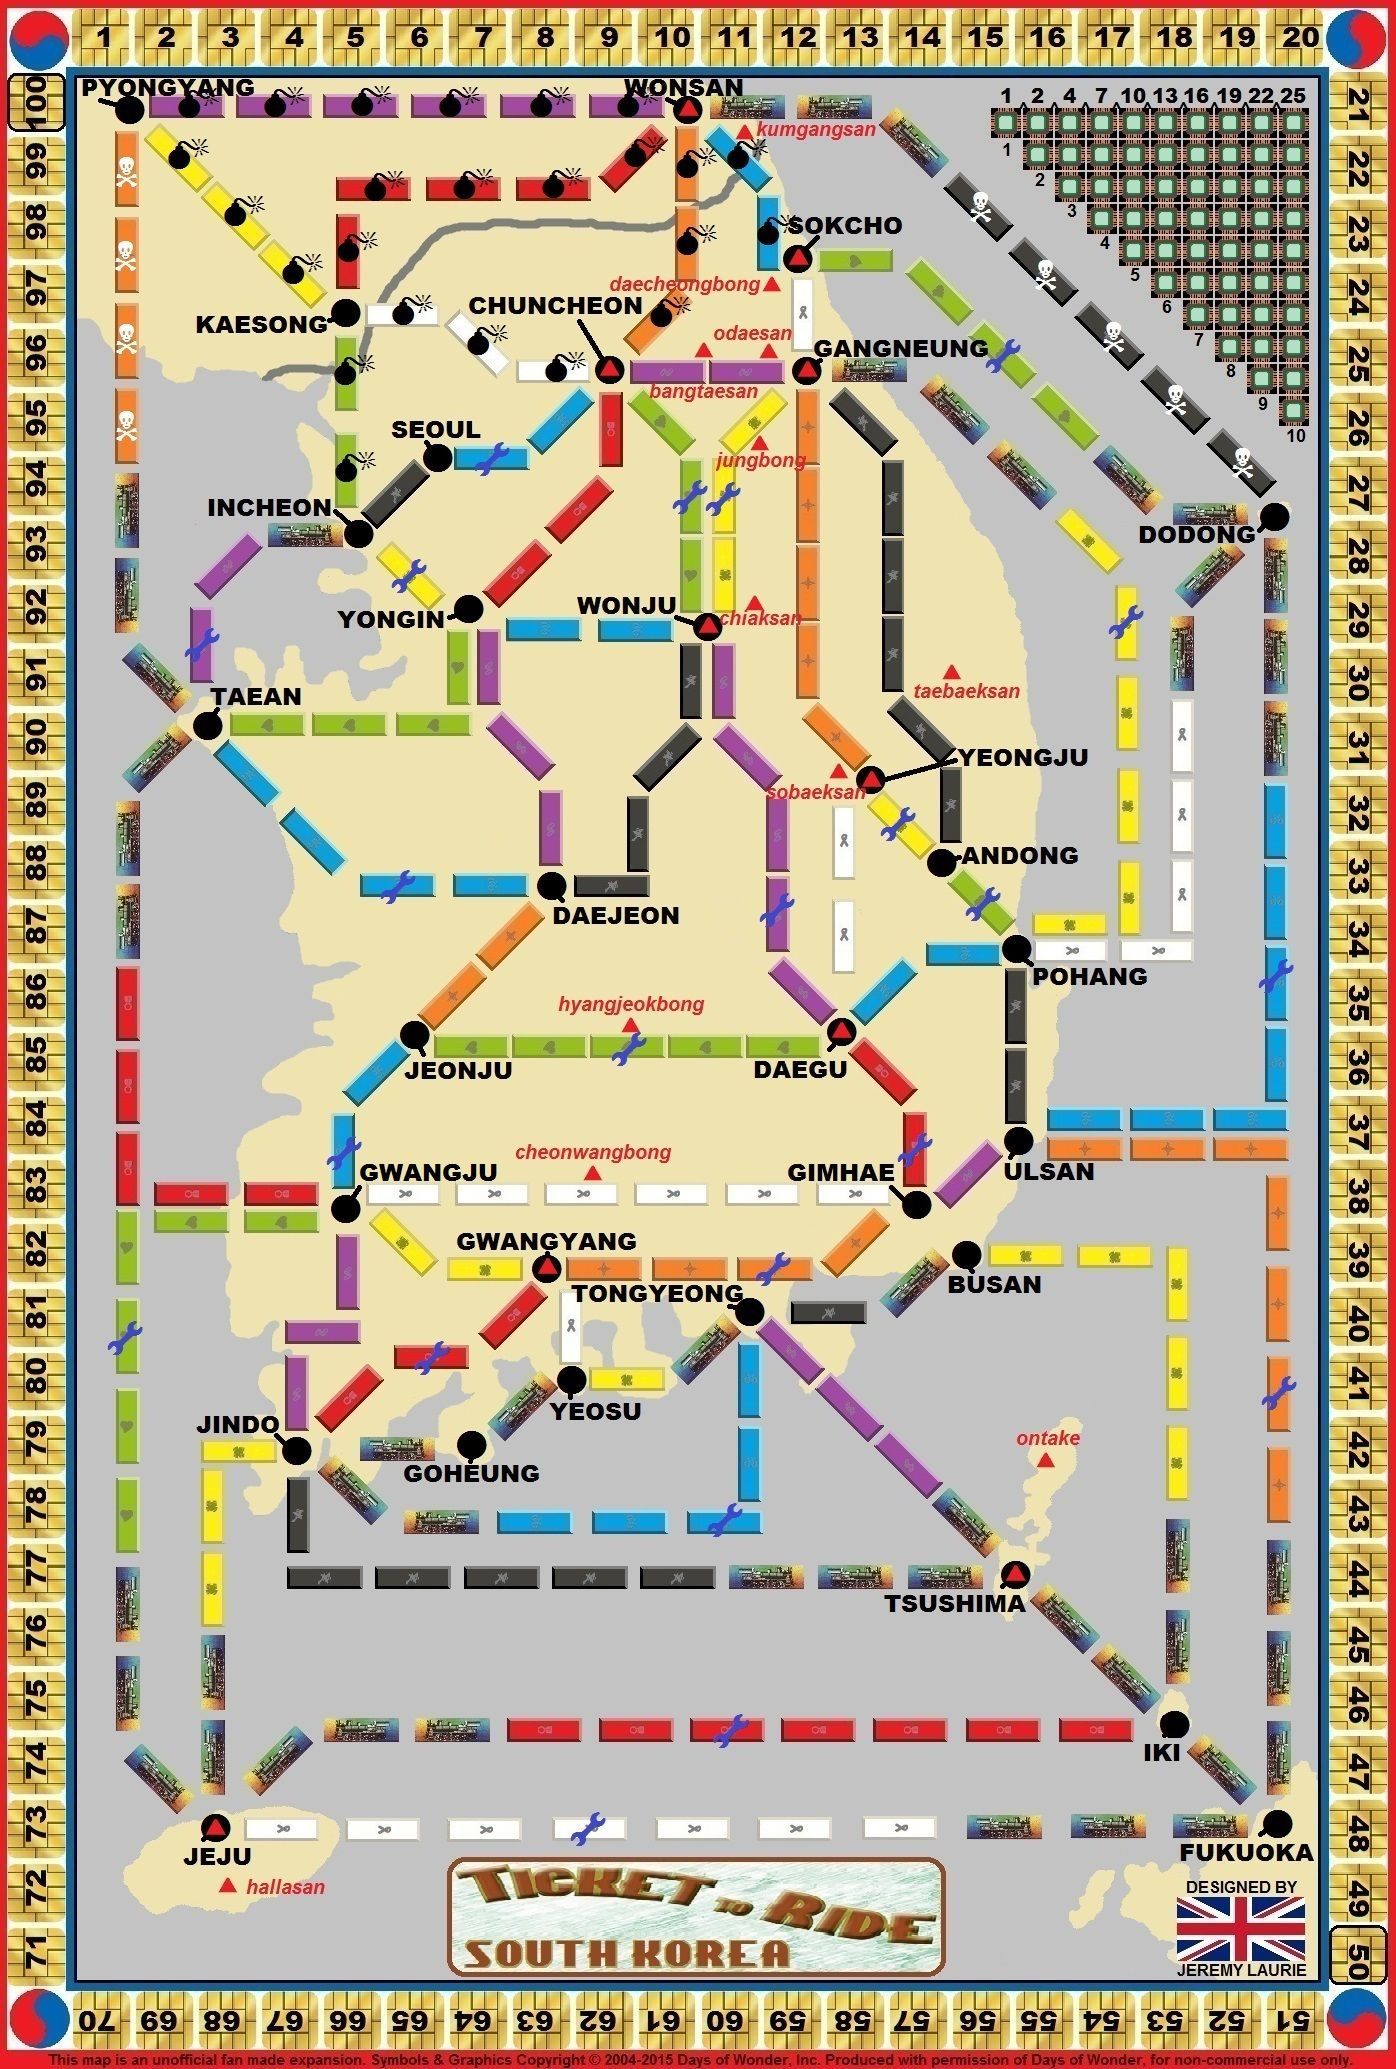 South Korea (fan expansion of Ticket to Ride)